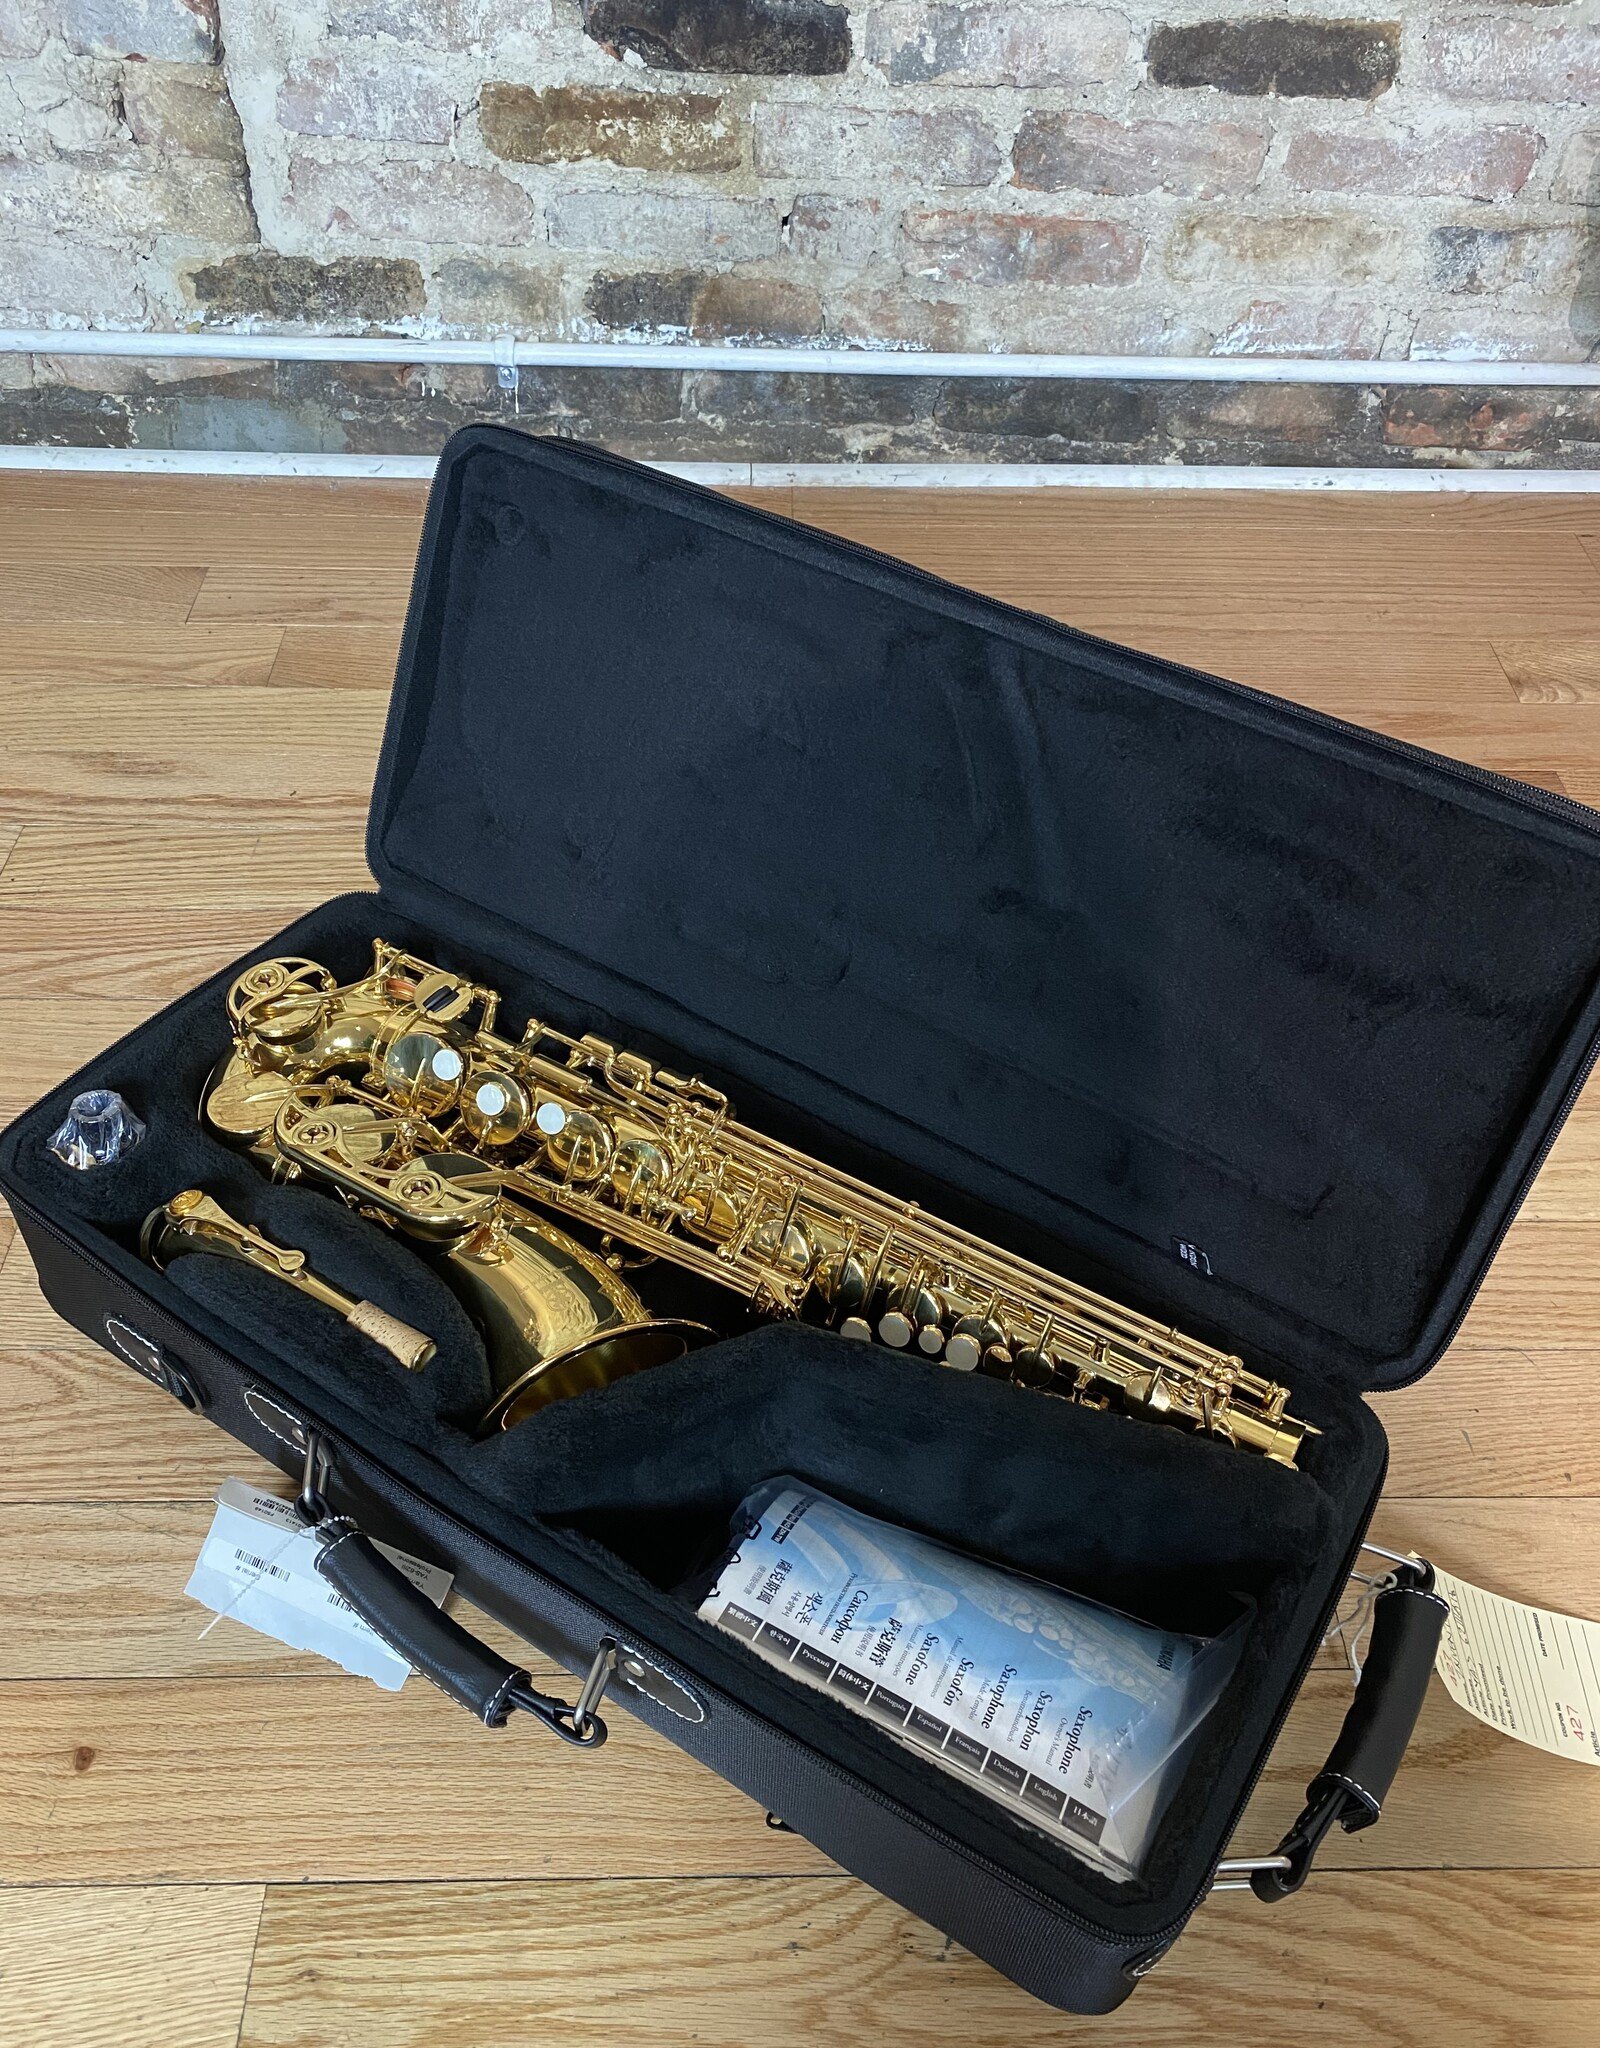 Yamaha YAS 62 III Professional Alto Saxophone  in NEW open Box Condition!